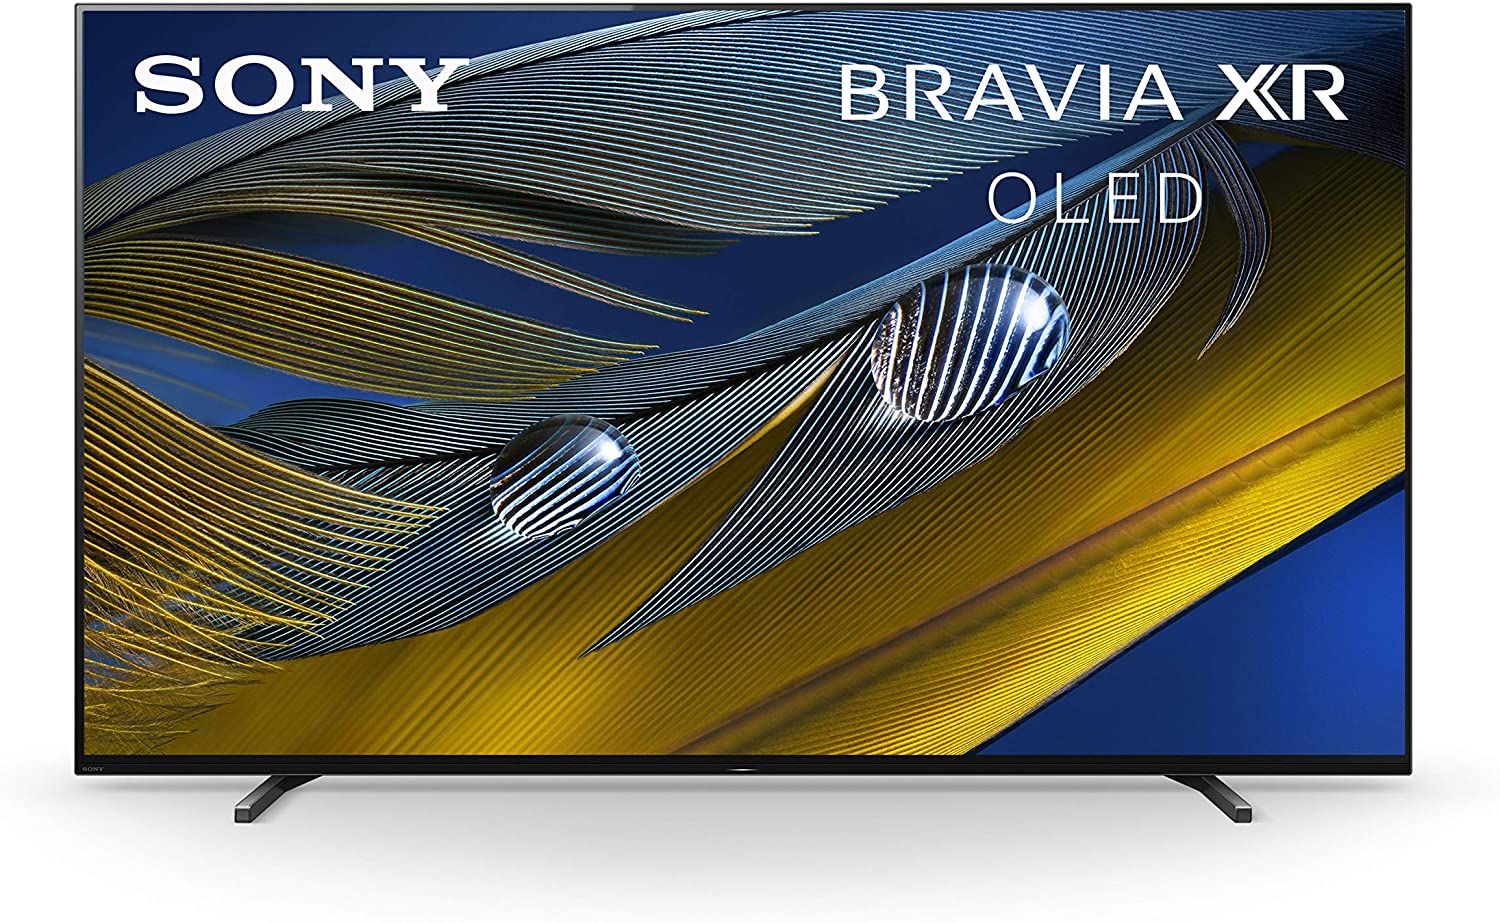 Prime Card 10% cashback on sony and lg oled tvs Sony a80j 77" $2700, LG c1 77" $2610